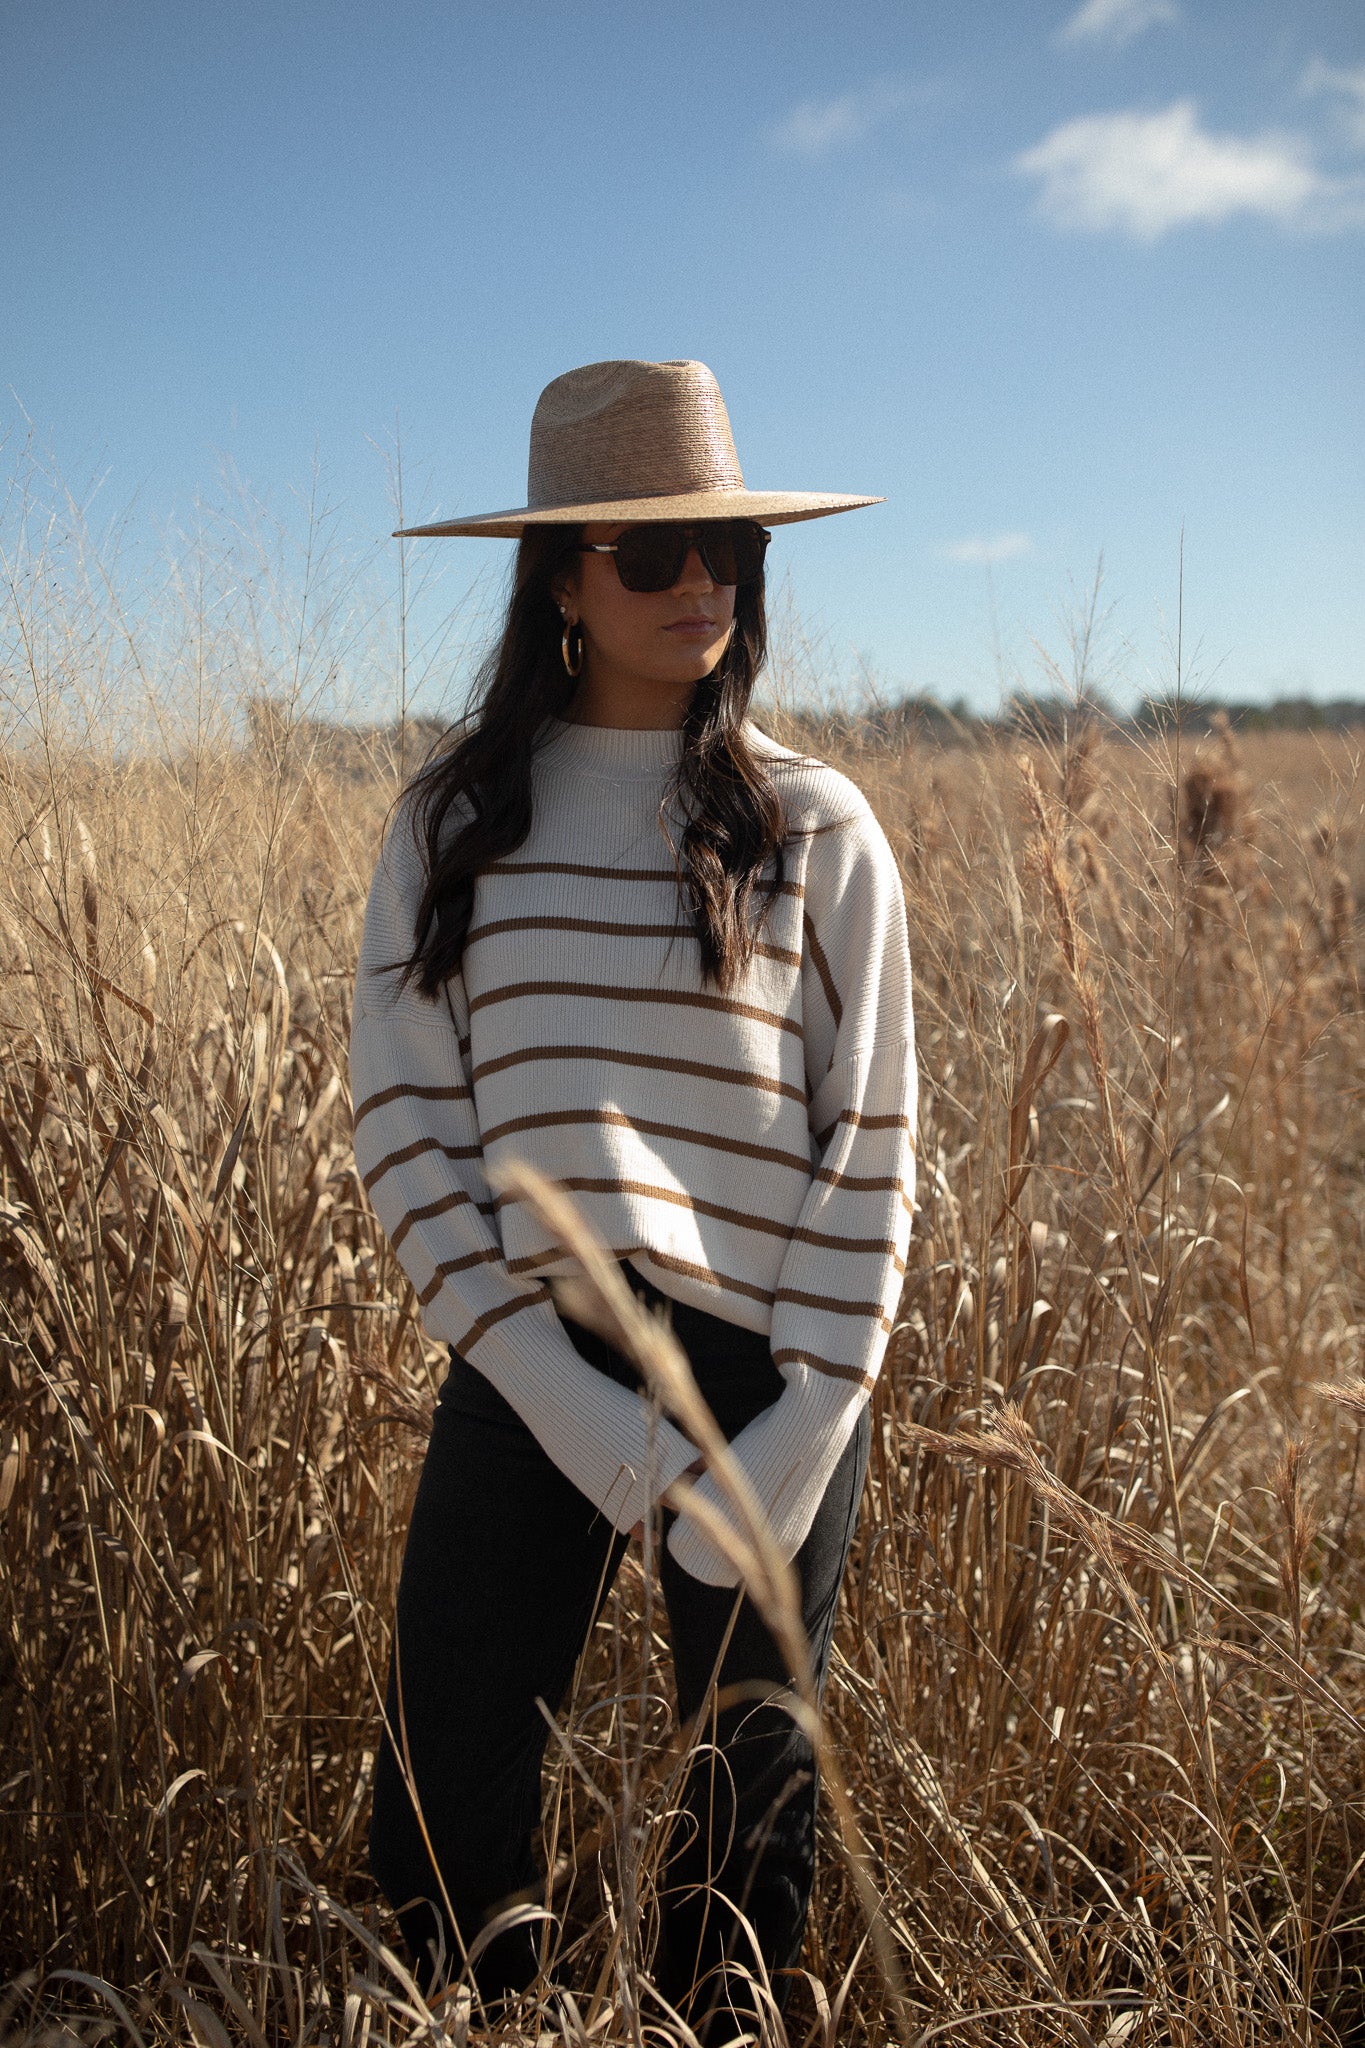 Natural Striped Sweater